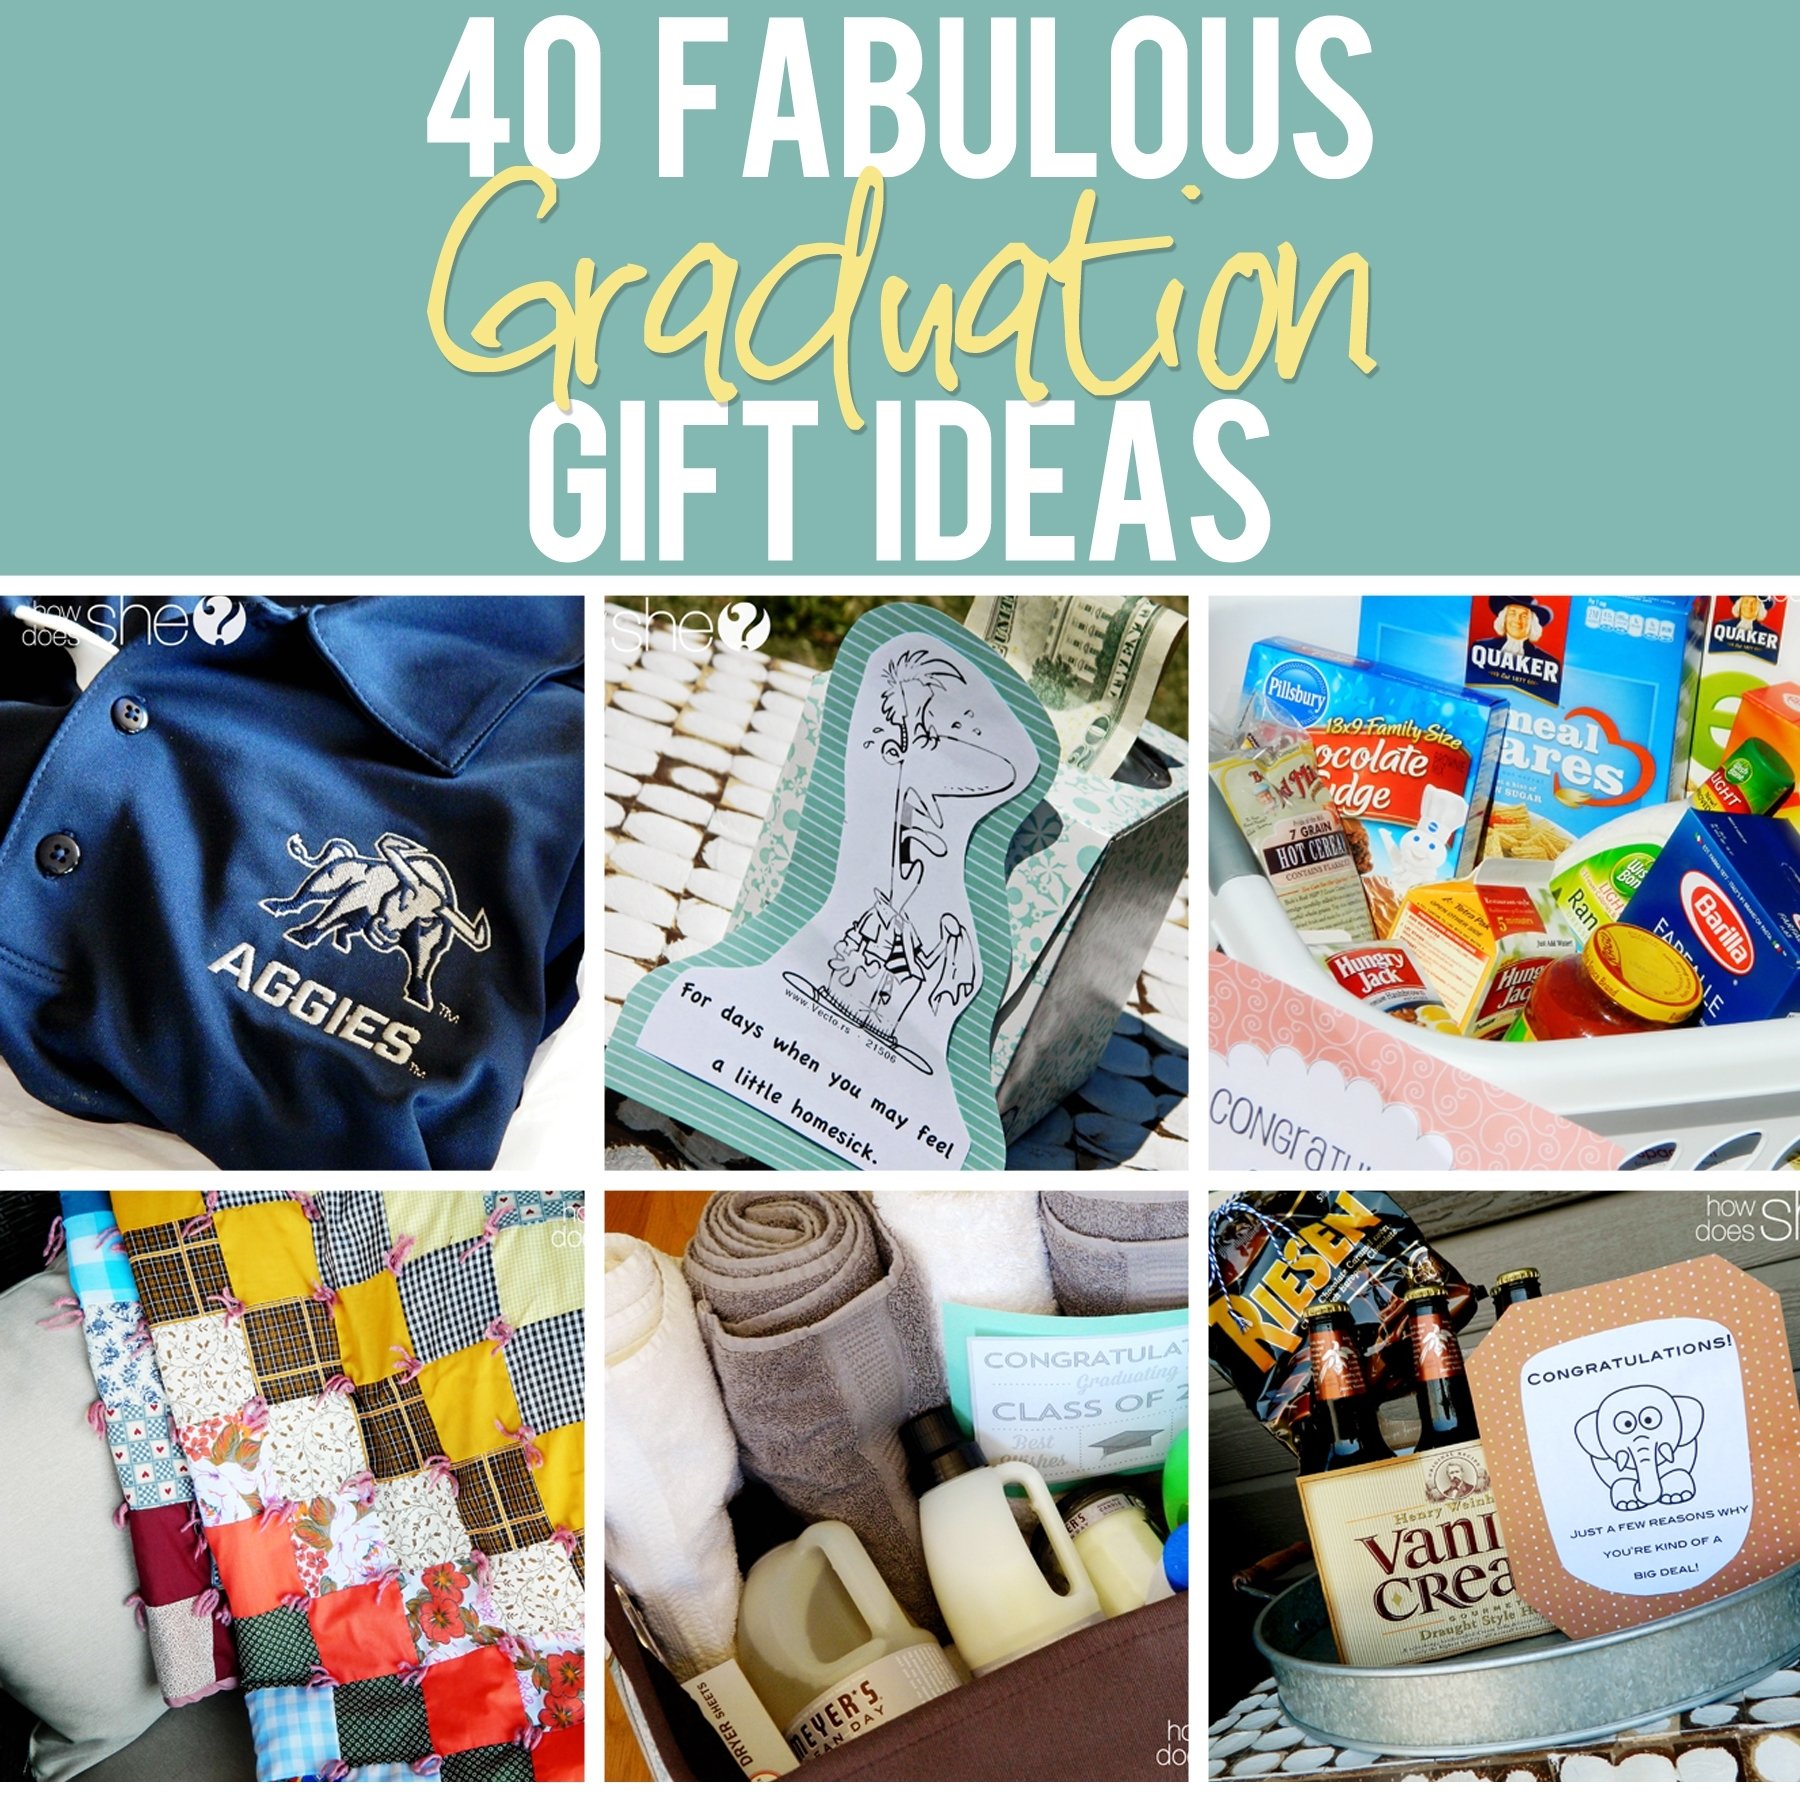 10 Awesome Ideas For College Graduation Gifts graduation gift ideas that are perfect for any graduate 4 2022